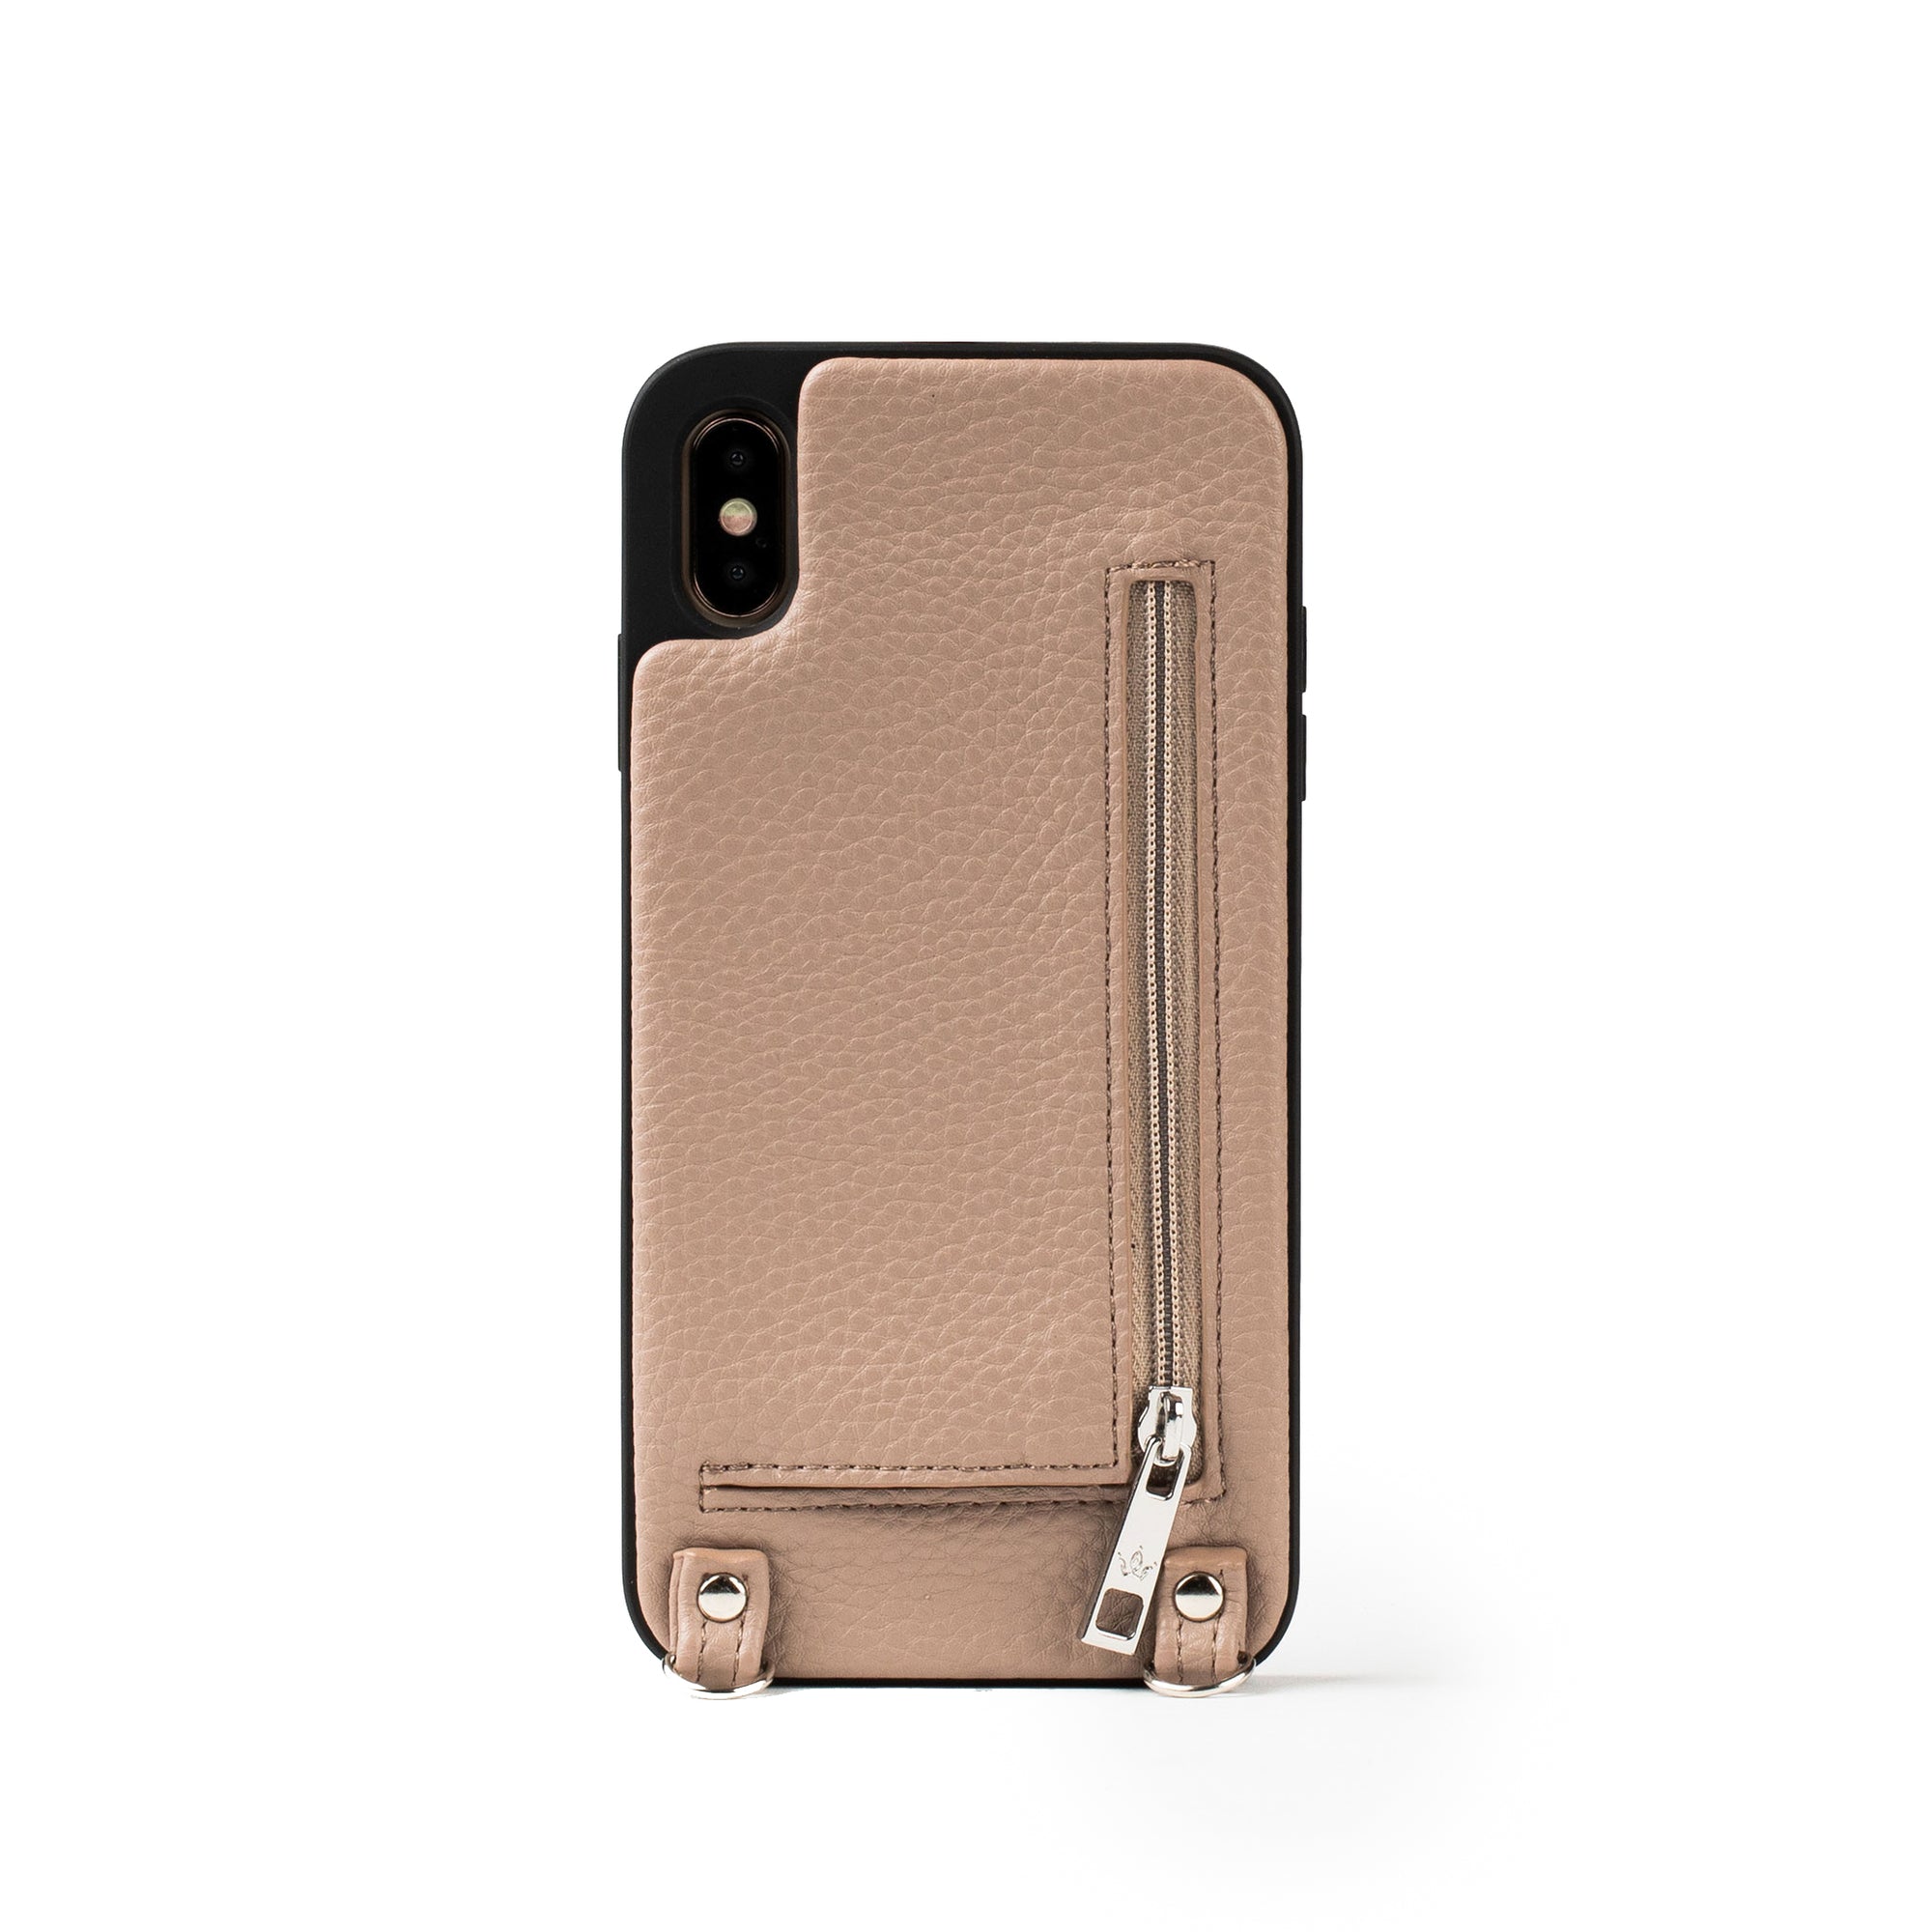 Wallet Case For iPhone 13 12 11 Pro Max Mini 8 7 6 Plus XS Max Soft  Silicone Card Slot Handbag Purse Phone Cover With Long Chain - AliExpress